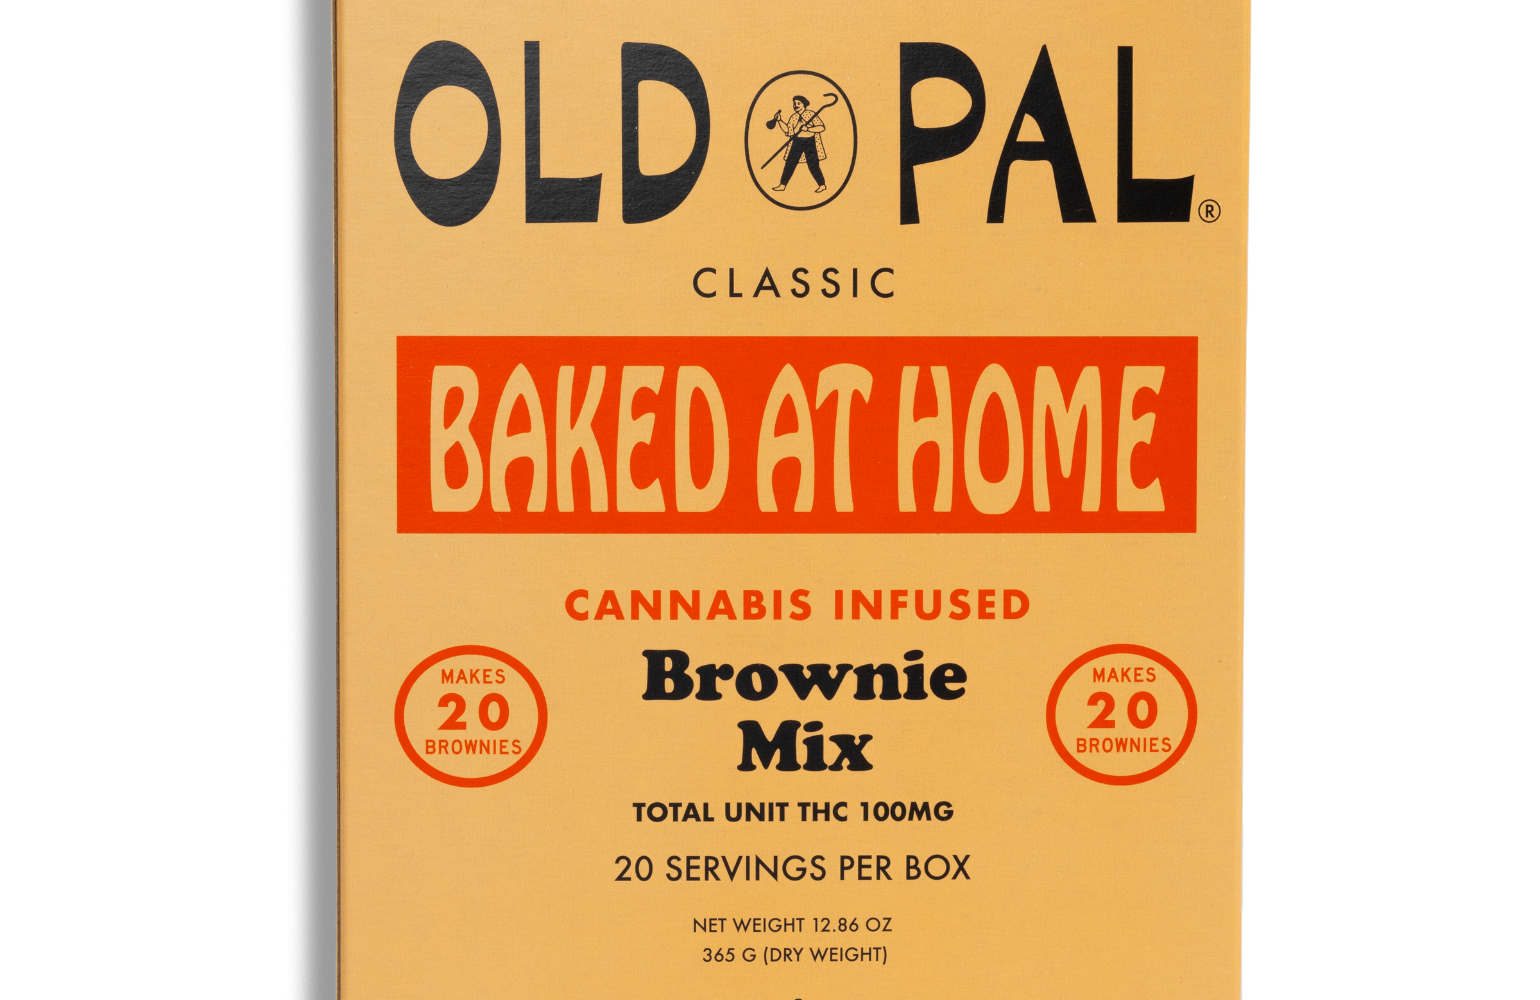 Old Pal Baked at Home infused brownie mix